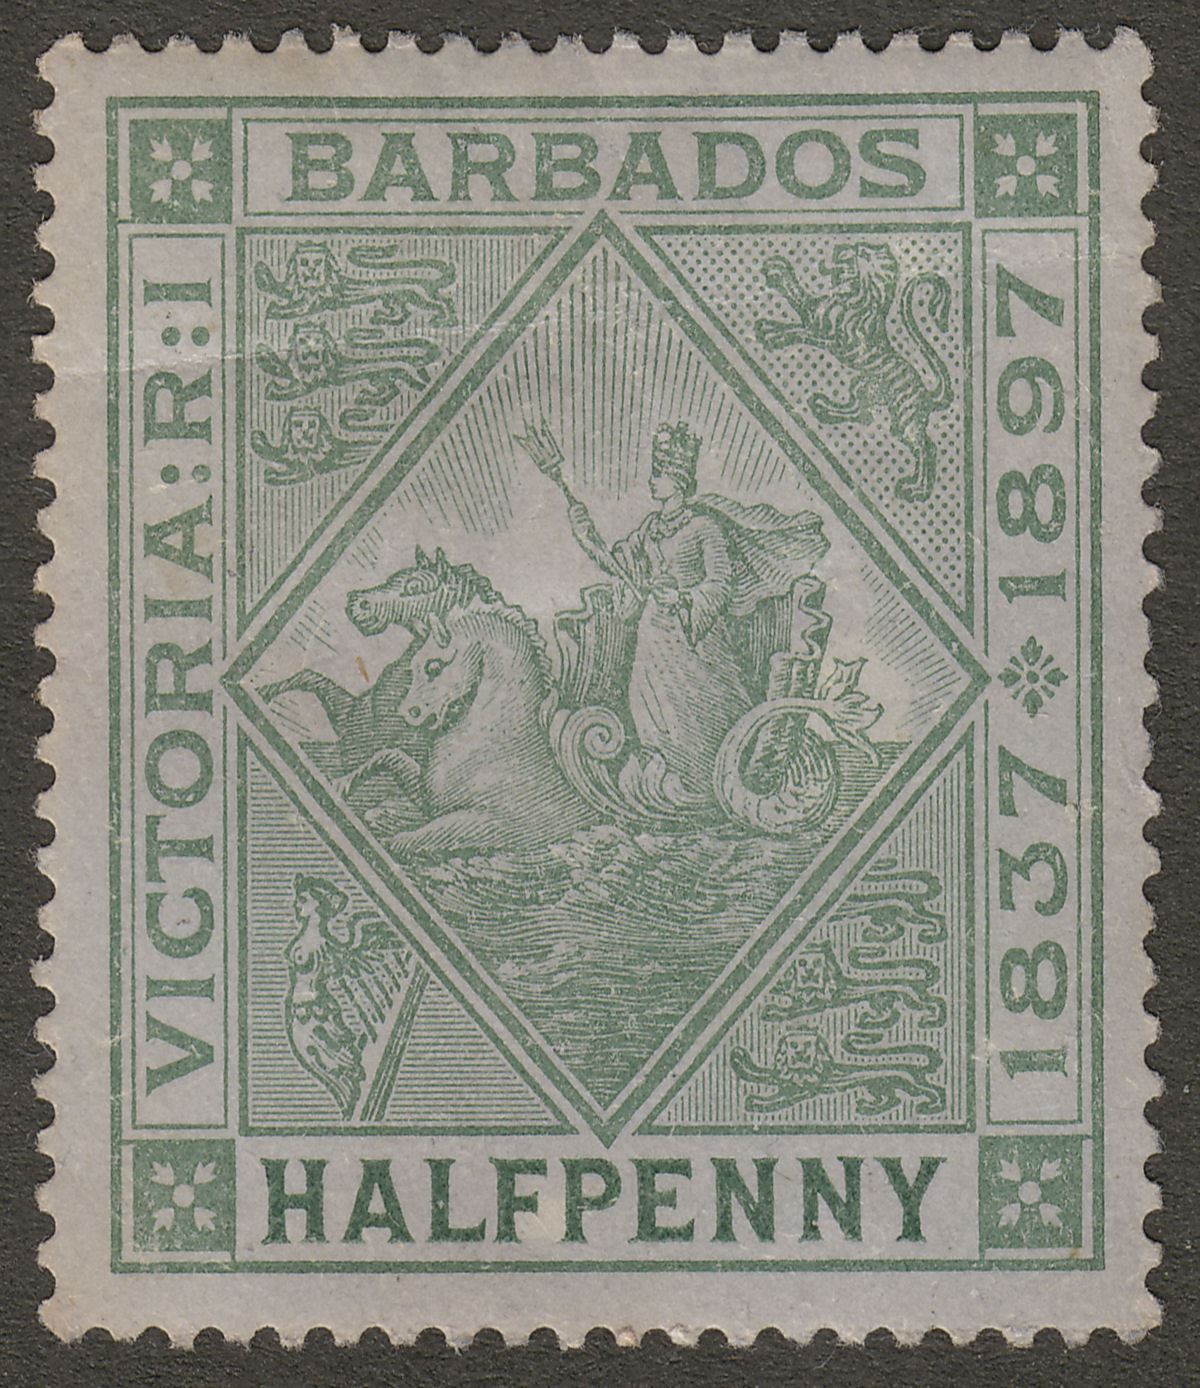 Barbados 1897 Diamond Jubilee ½d Blued Paper Mint SG126 cat £30 creased